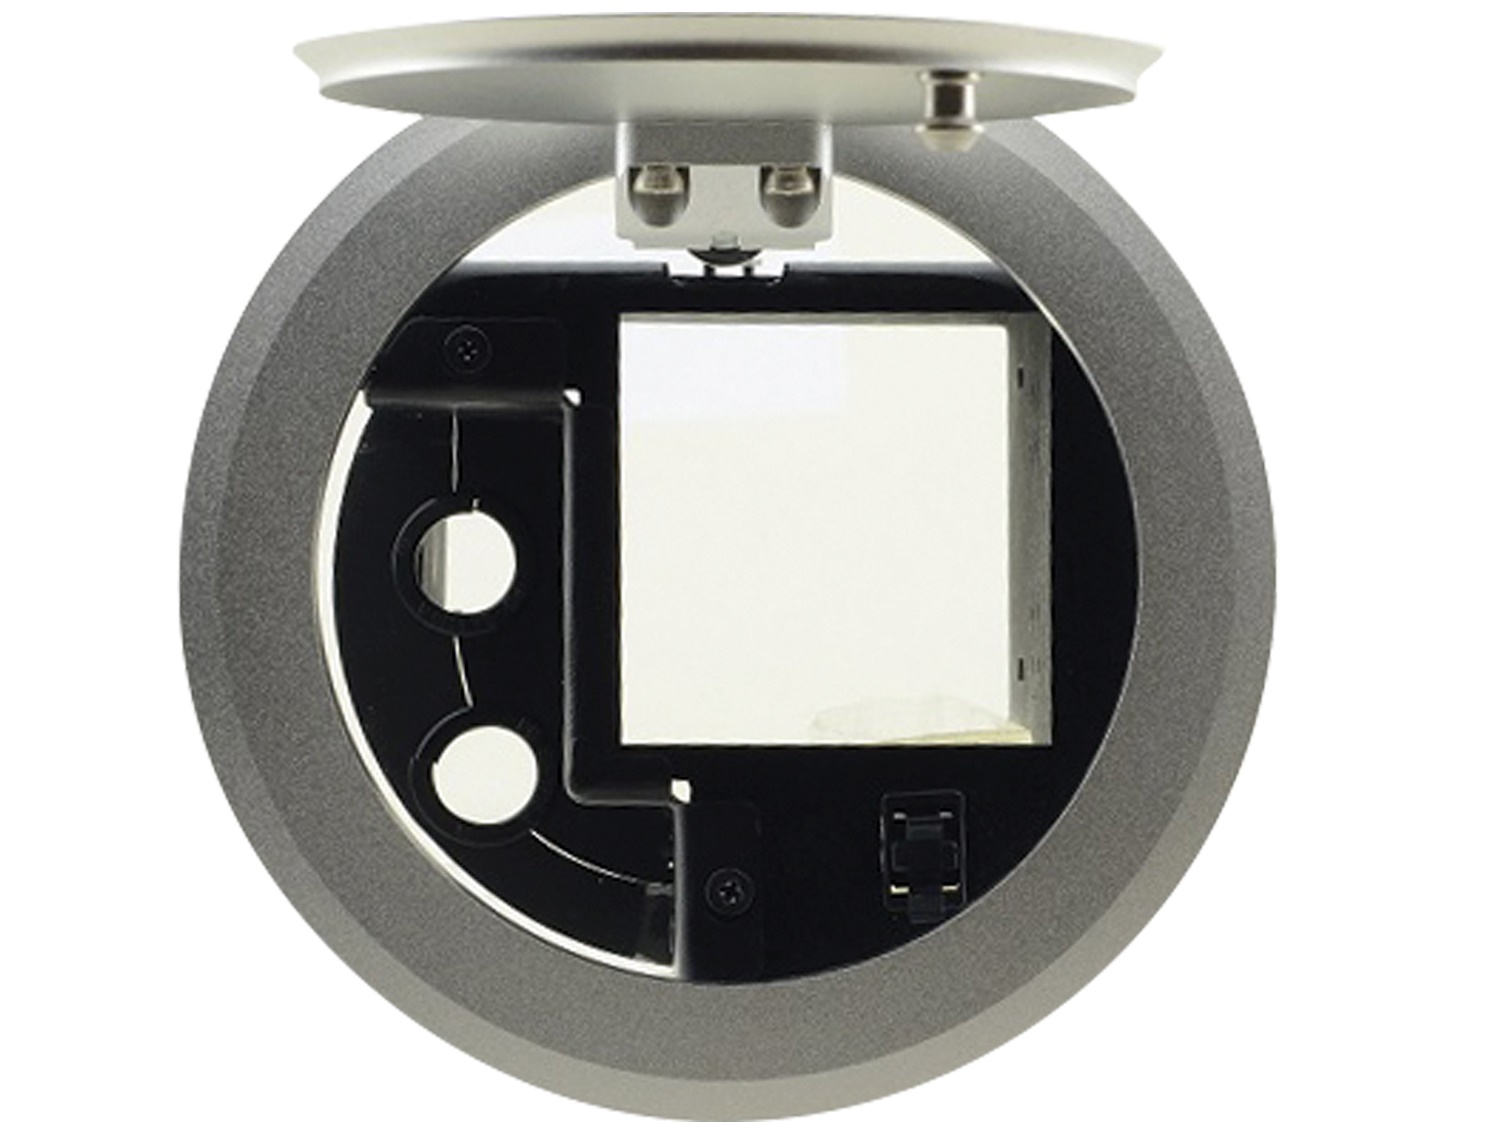 RTBUS-27XL(BC) Round Table Connection Bus for Power Socket and Cable Pass-Throughs/Silver by Kramer